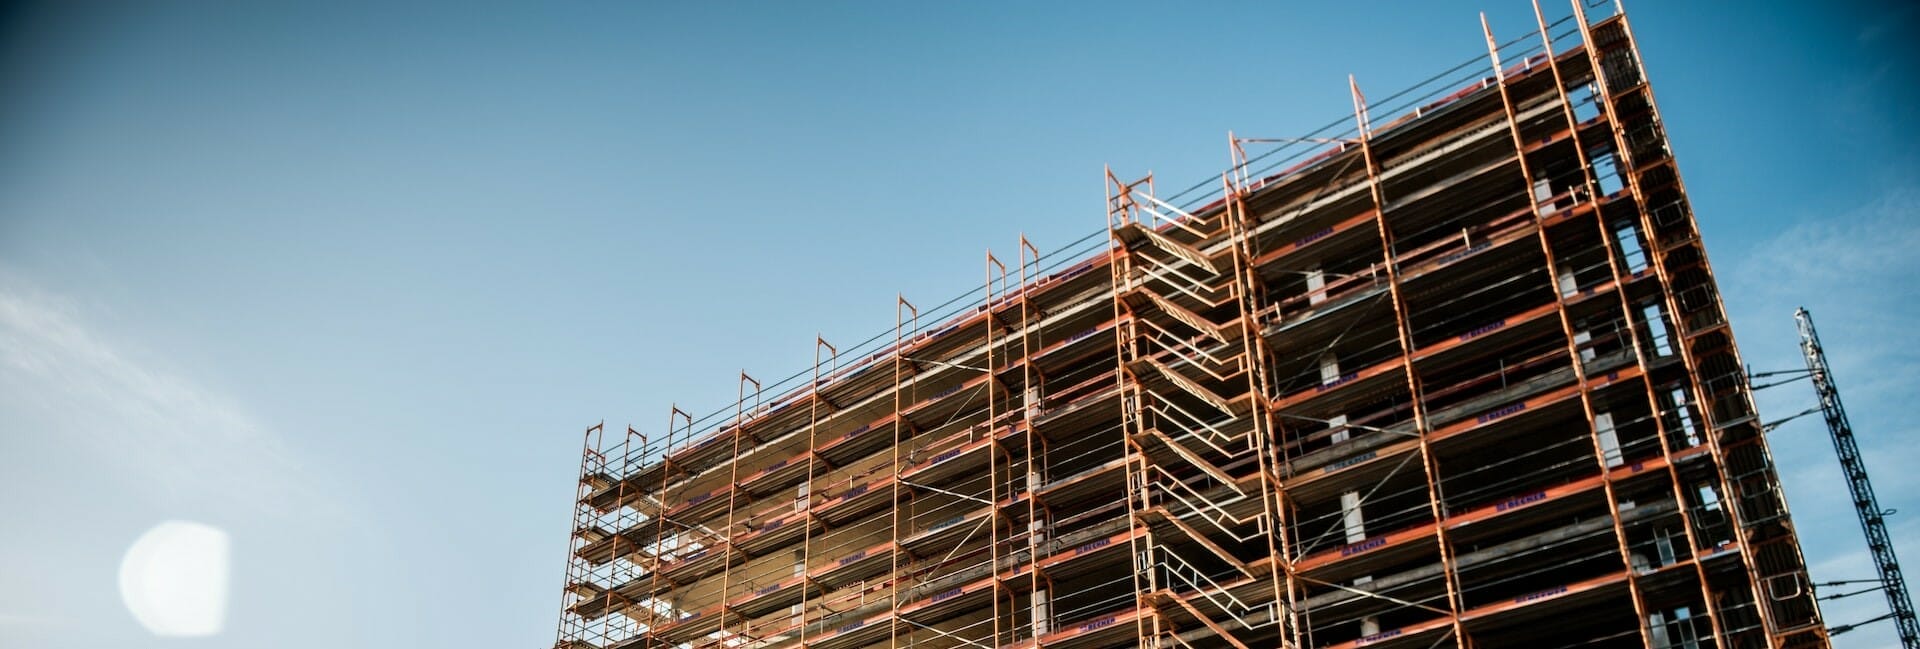 Our Scaffolding Health & Safety Accreditations Blog